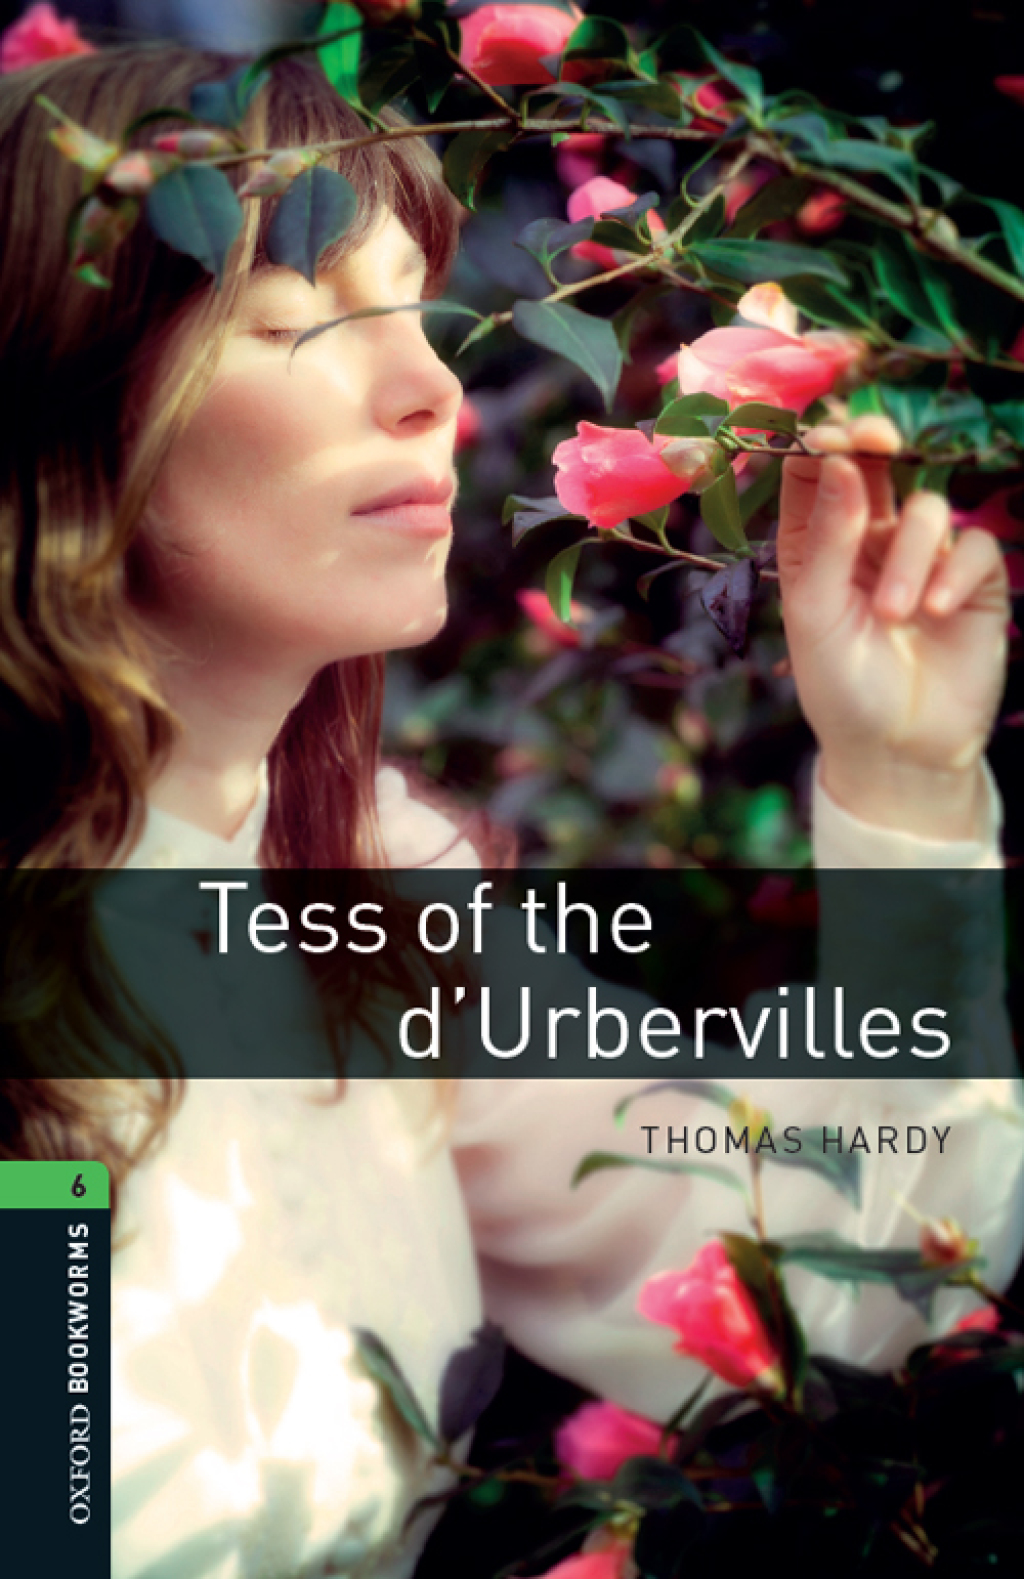 Tess of the d'Urbervilles Level 6 Oxford Bookworms Library - 3rd Edition (eBook Rental)